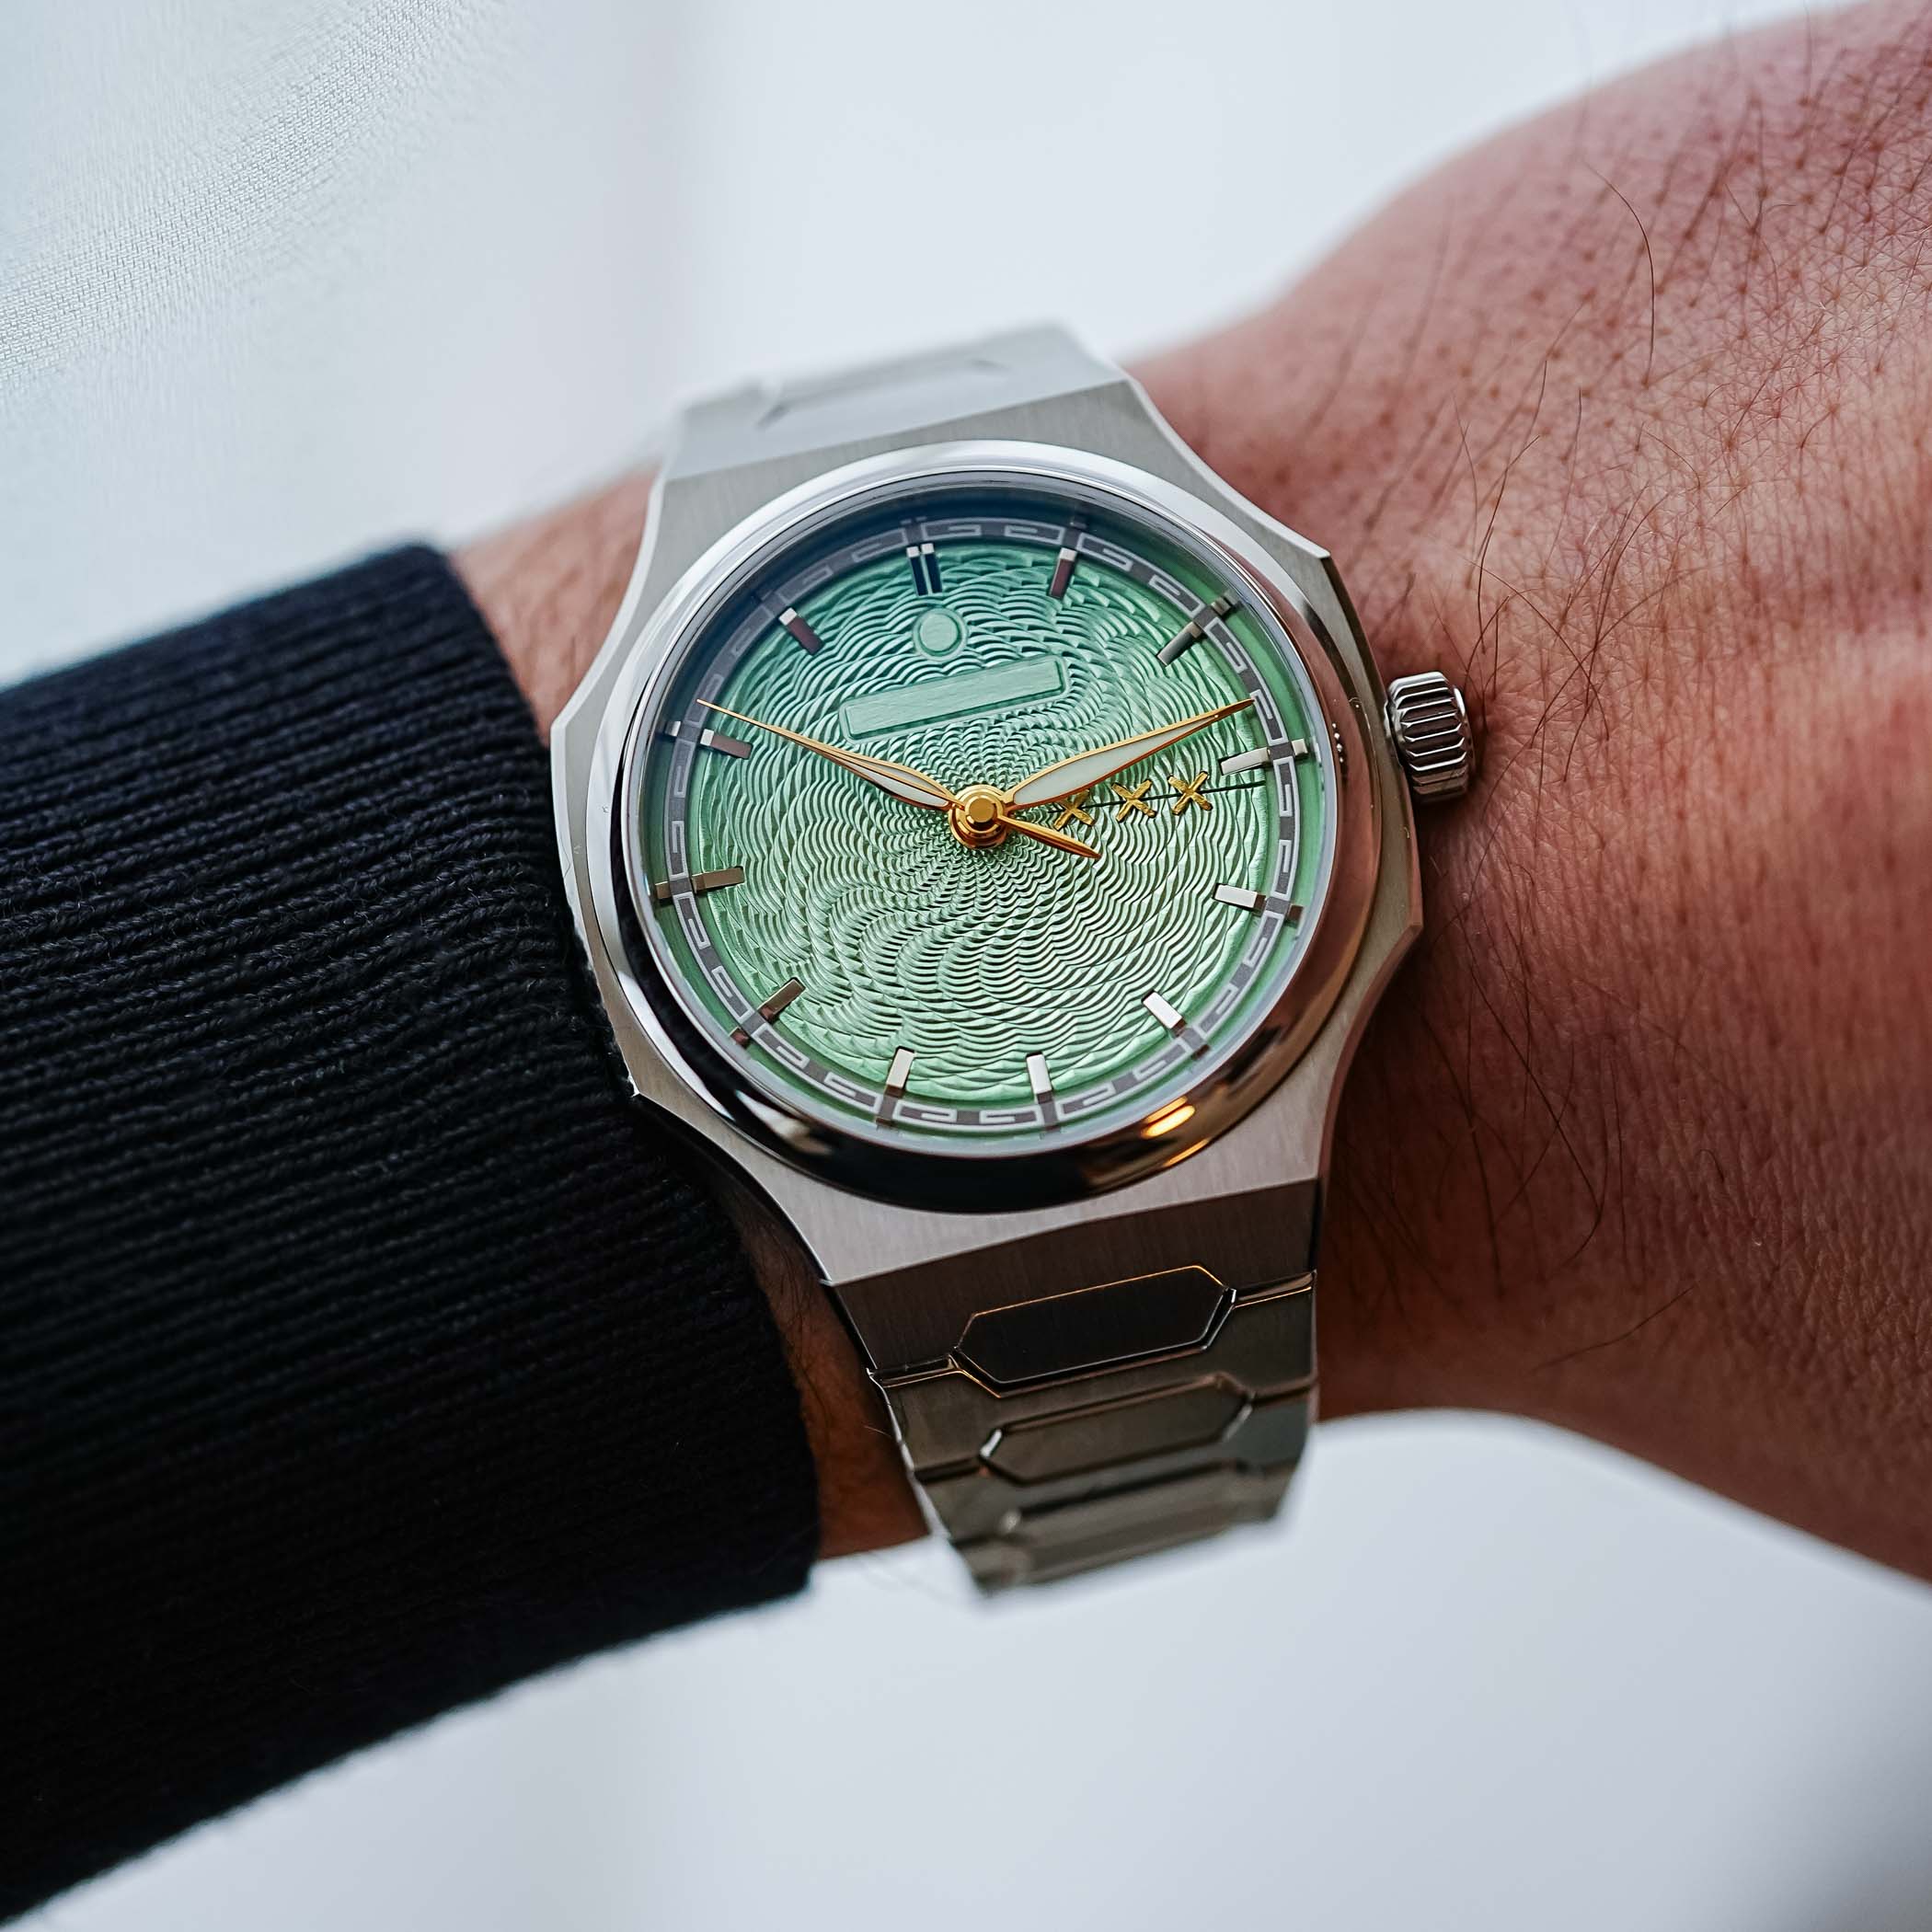 Wristcheck x Atelier Wen Perception x seconde-seconde special edition - hands-on - 10